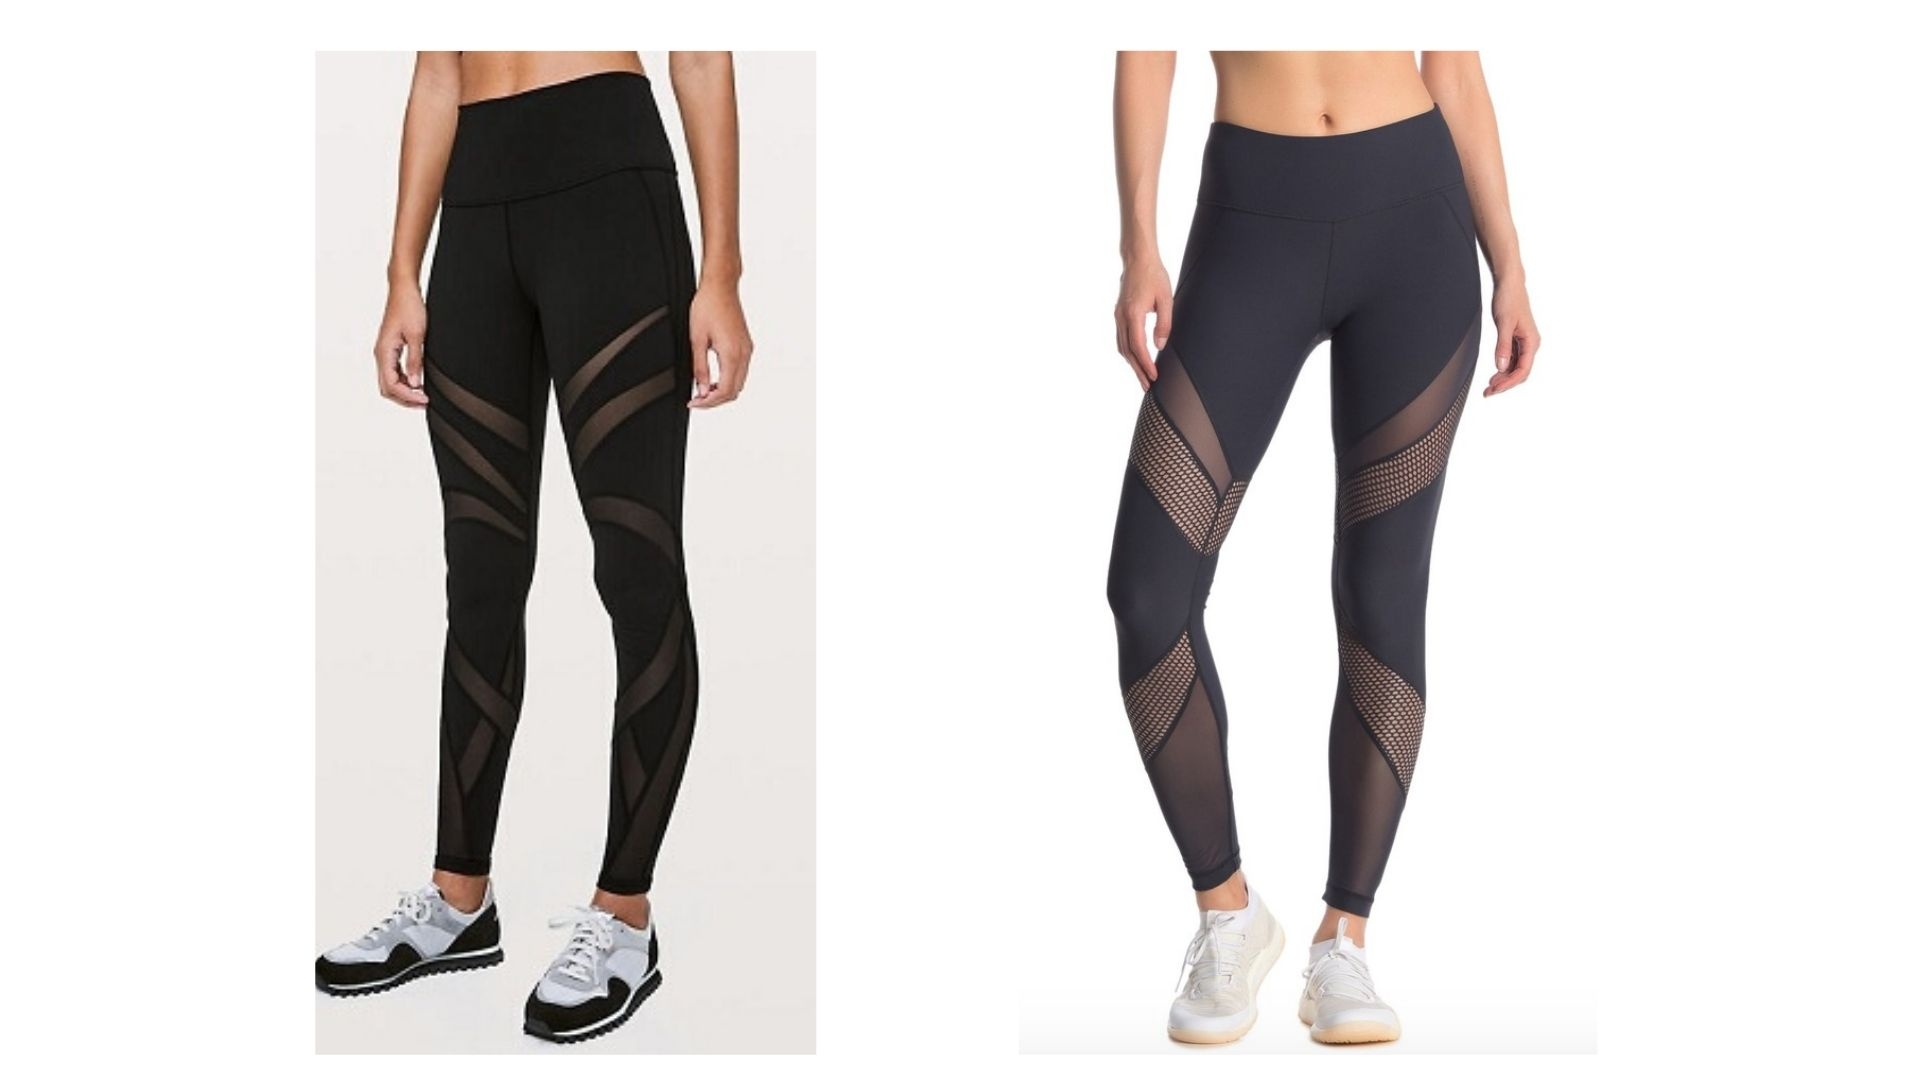 Trying the Most Popular Lululemon Align Dupes